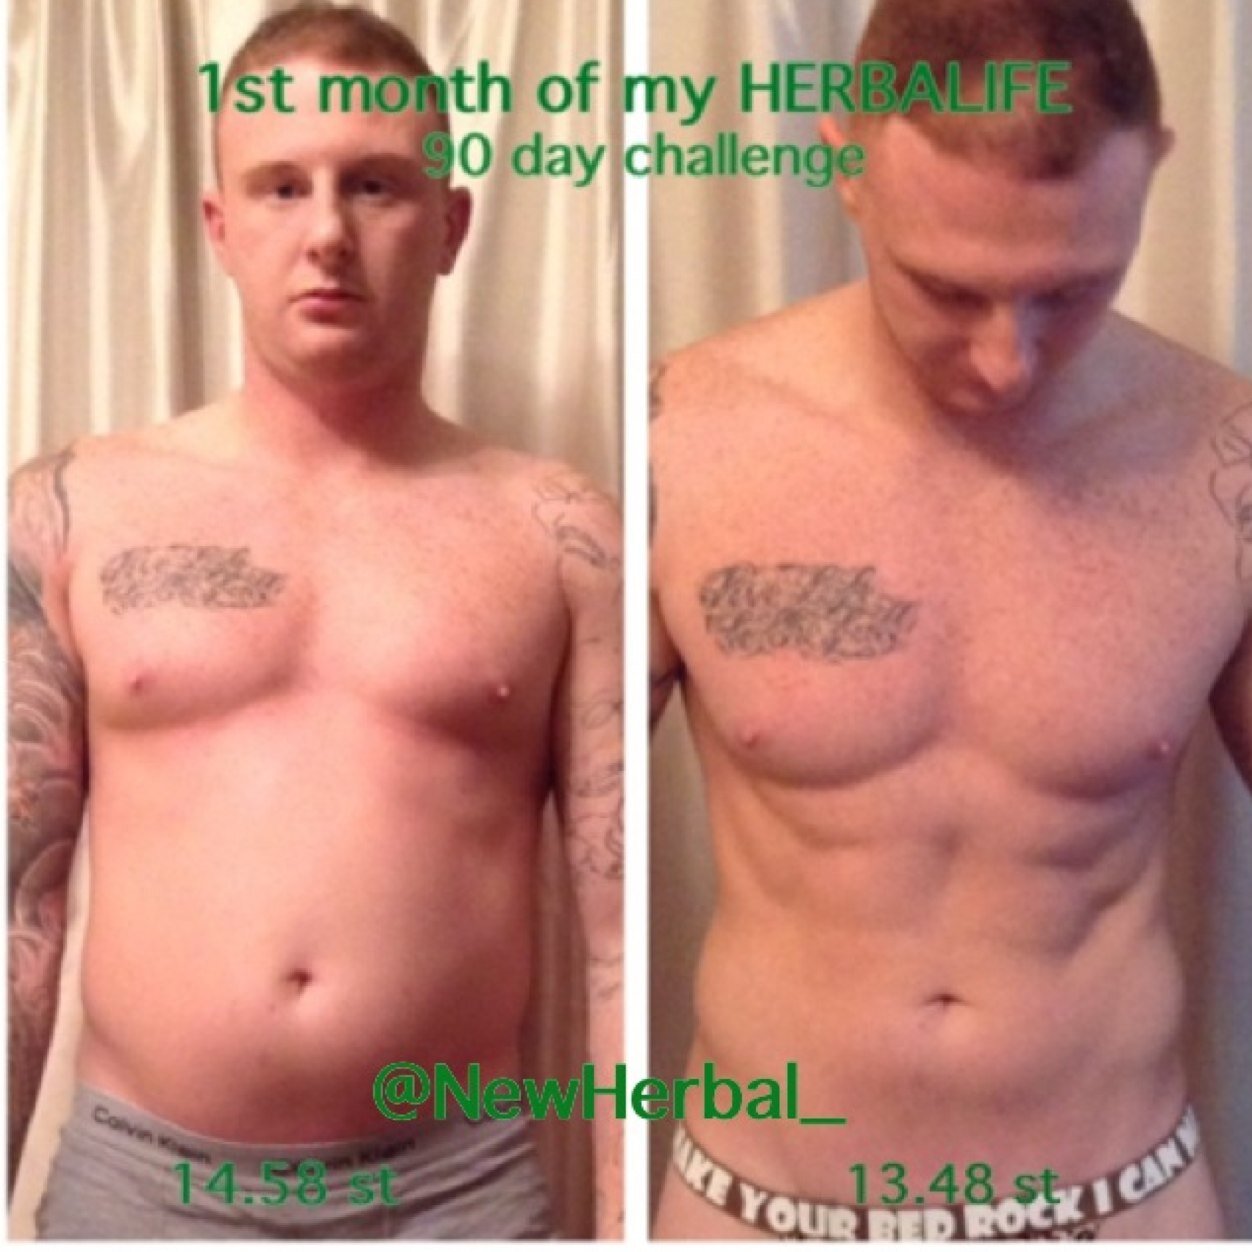 Herbalife independent distributor bringing you the finest nutrition products from losing weight, toning up, building lean muscle and mataining a healthy living